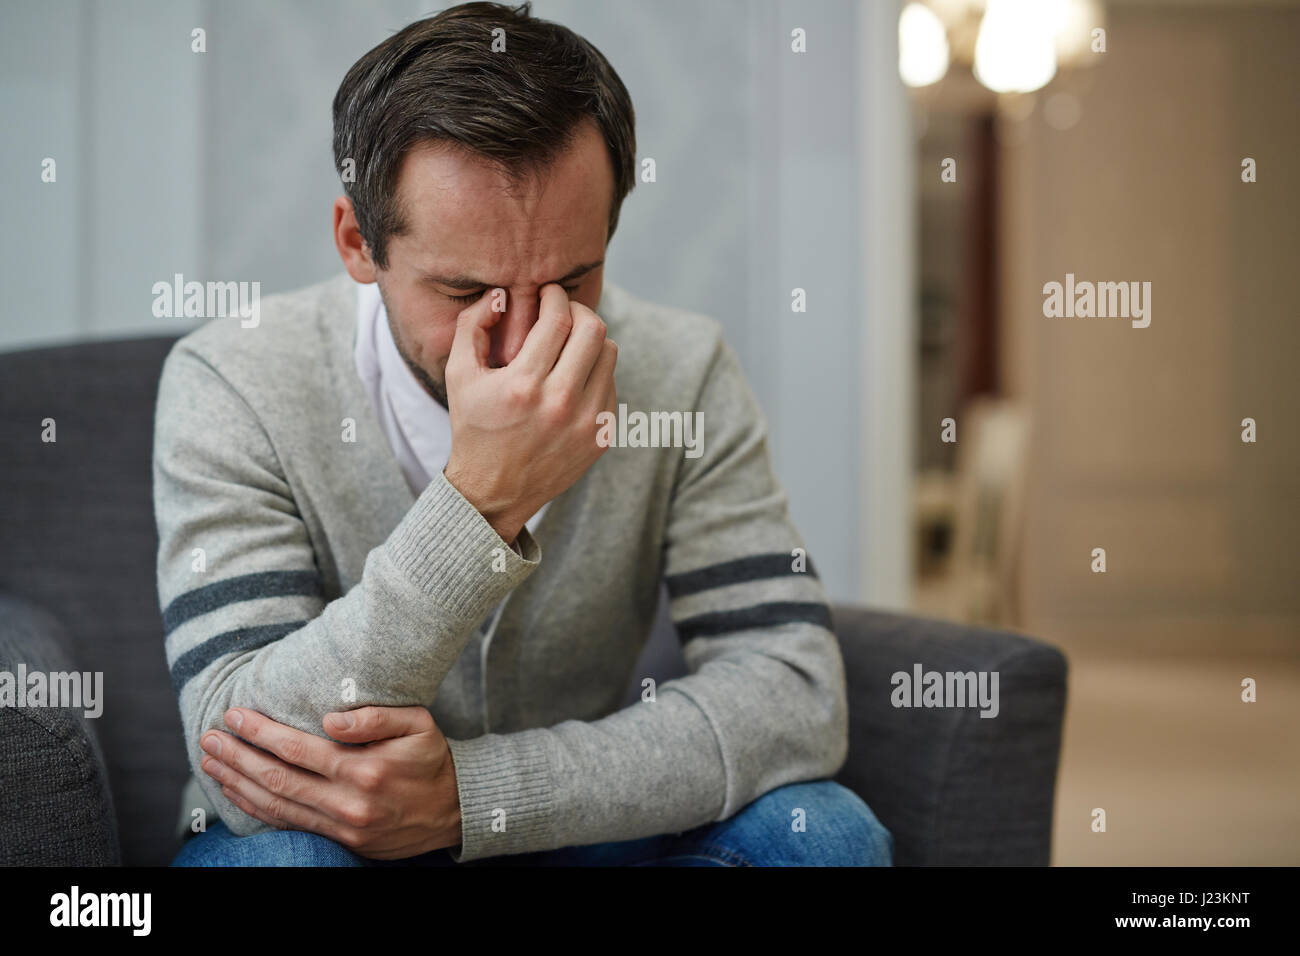 Desperate man crying during psychological session Stock Photo